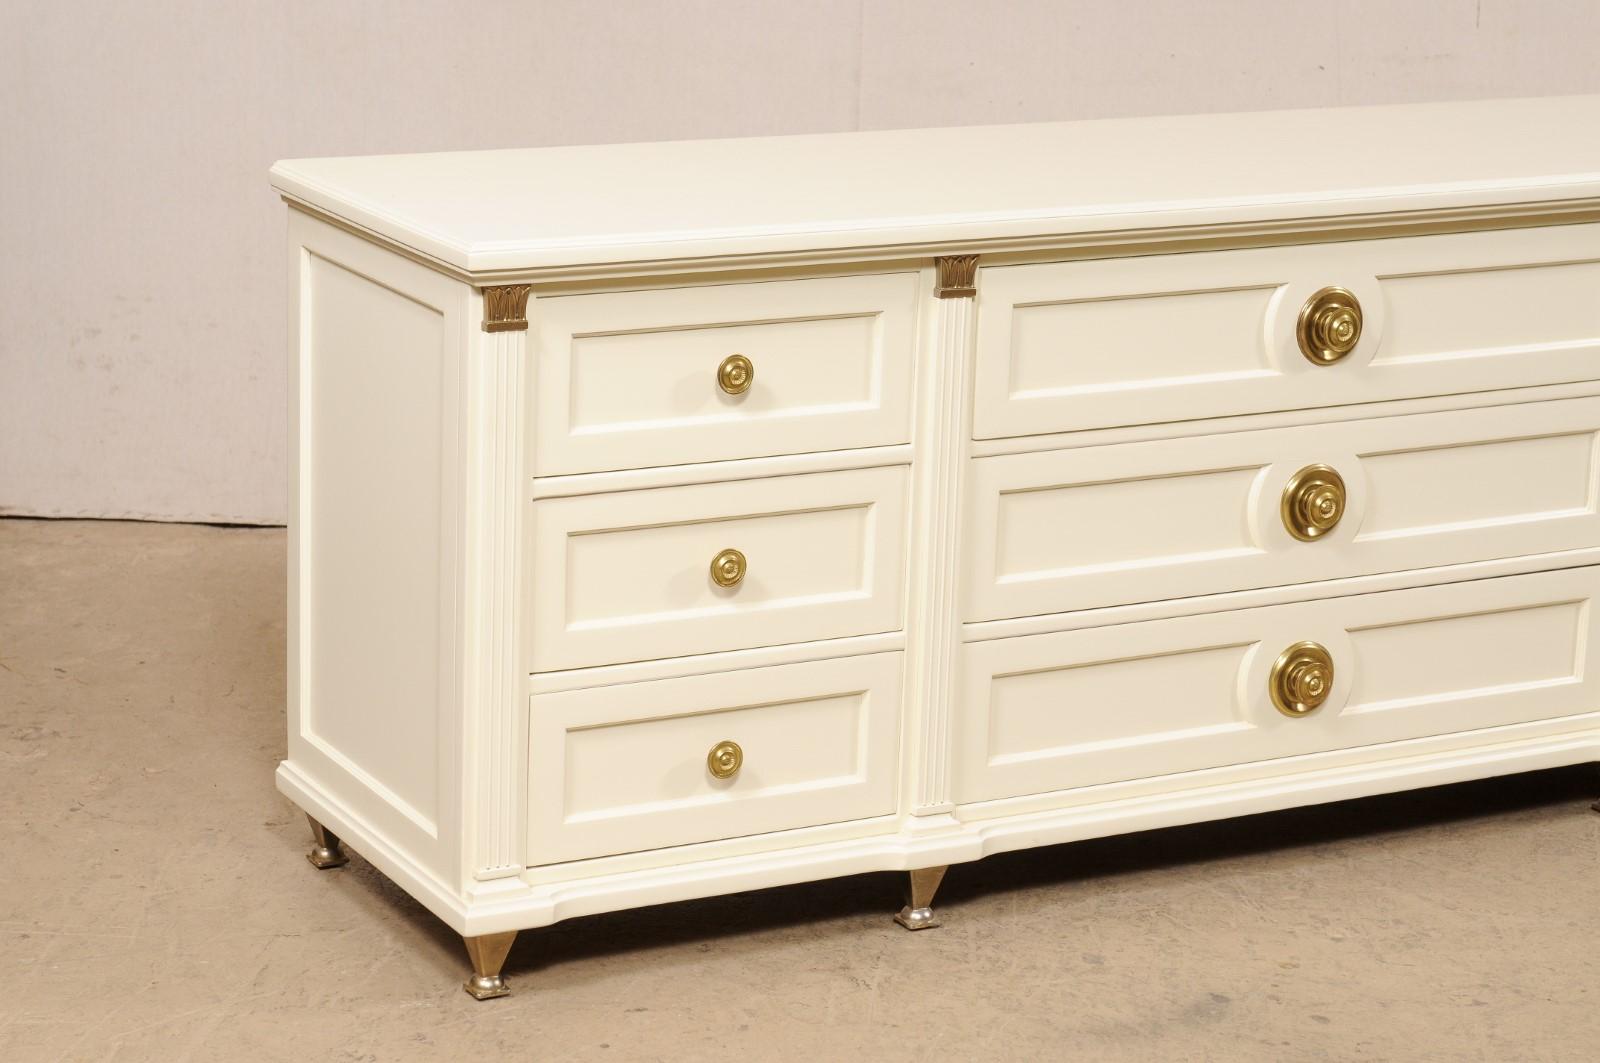 American Martinsville 7 Ft Long Chest of Drawers, Ivory with Gold Hardware & Accents